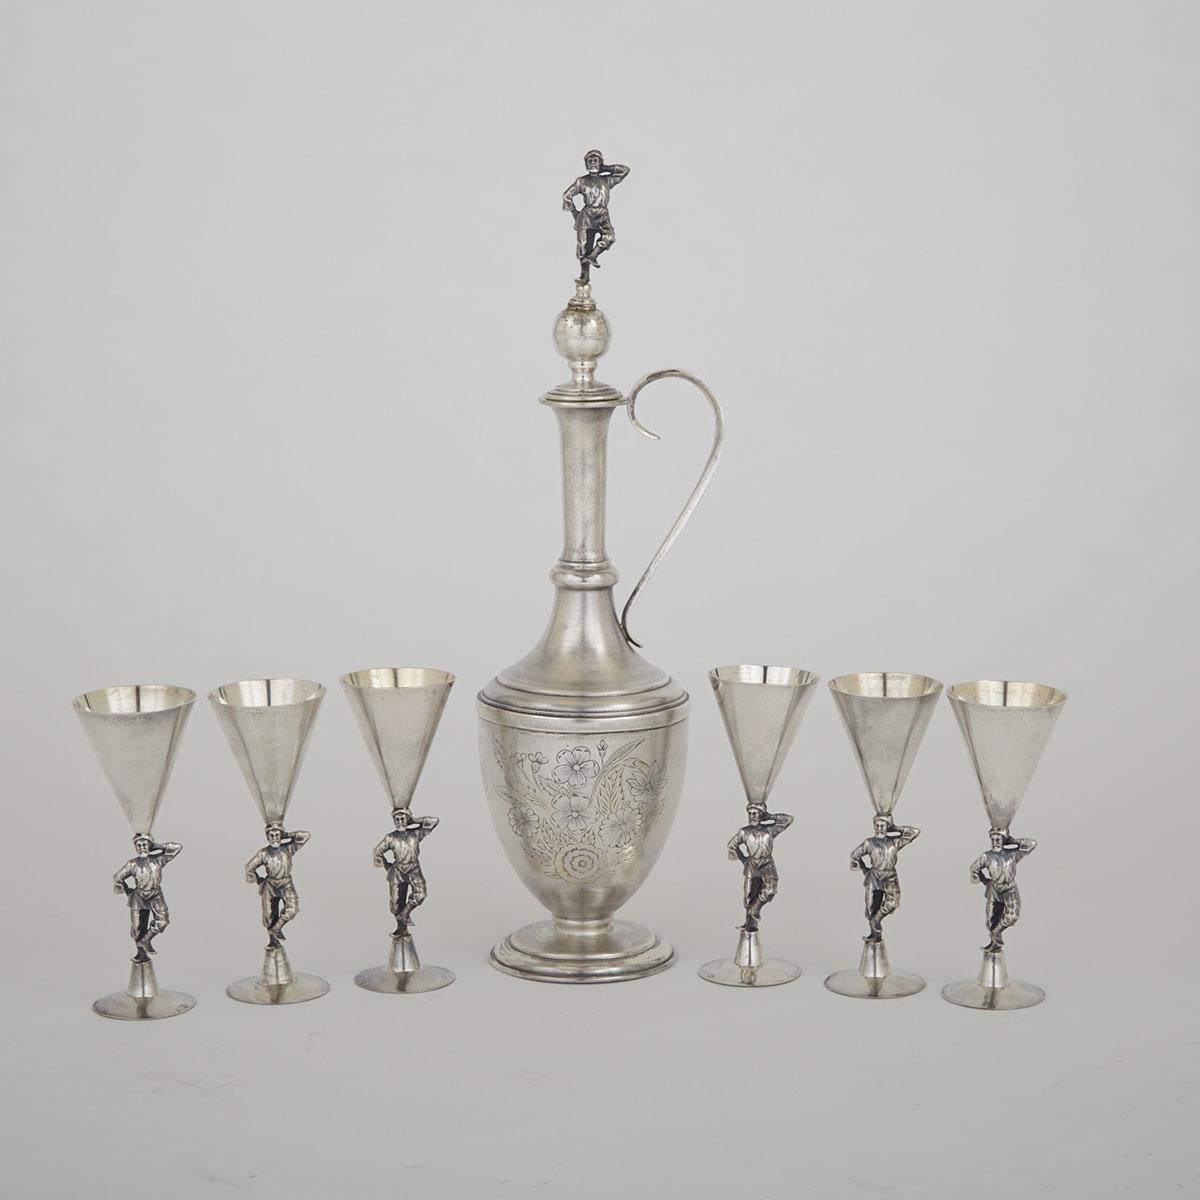 Russian Silver Carafe and Six Vodka Goblets, Moscow, 1908-17